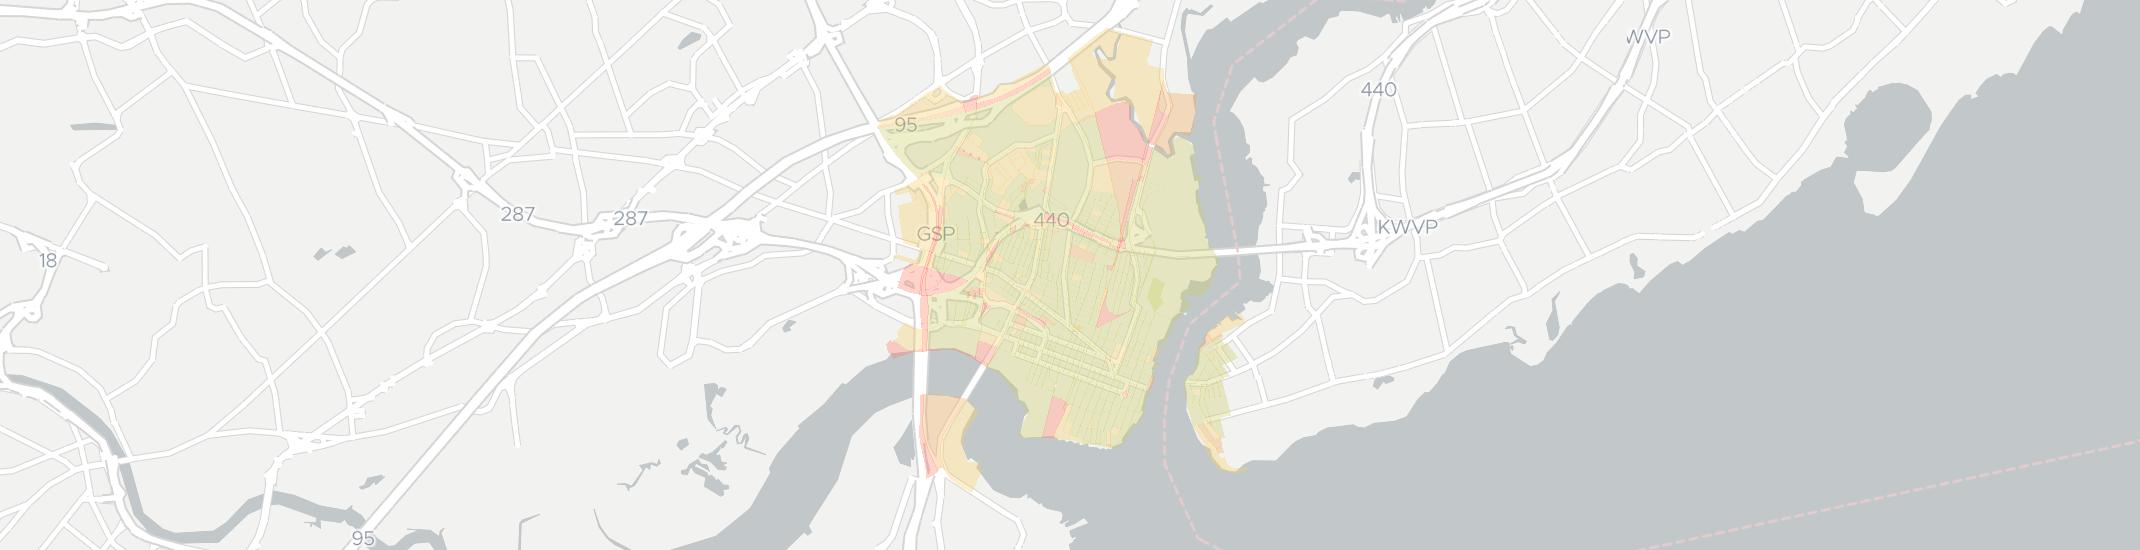 Perth Amboy Internet Competition Map. Click for interactive map